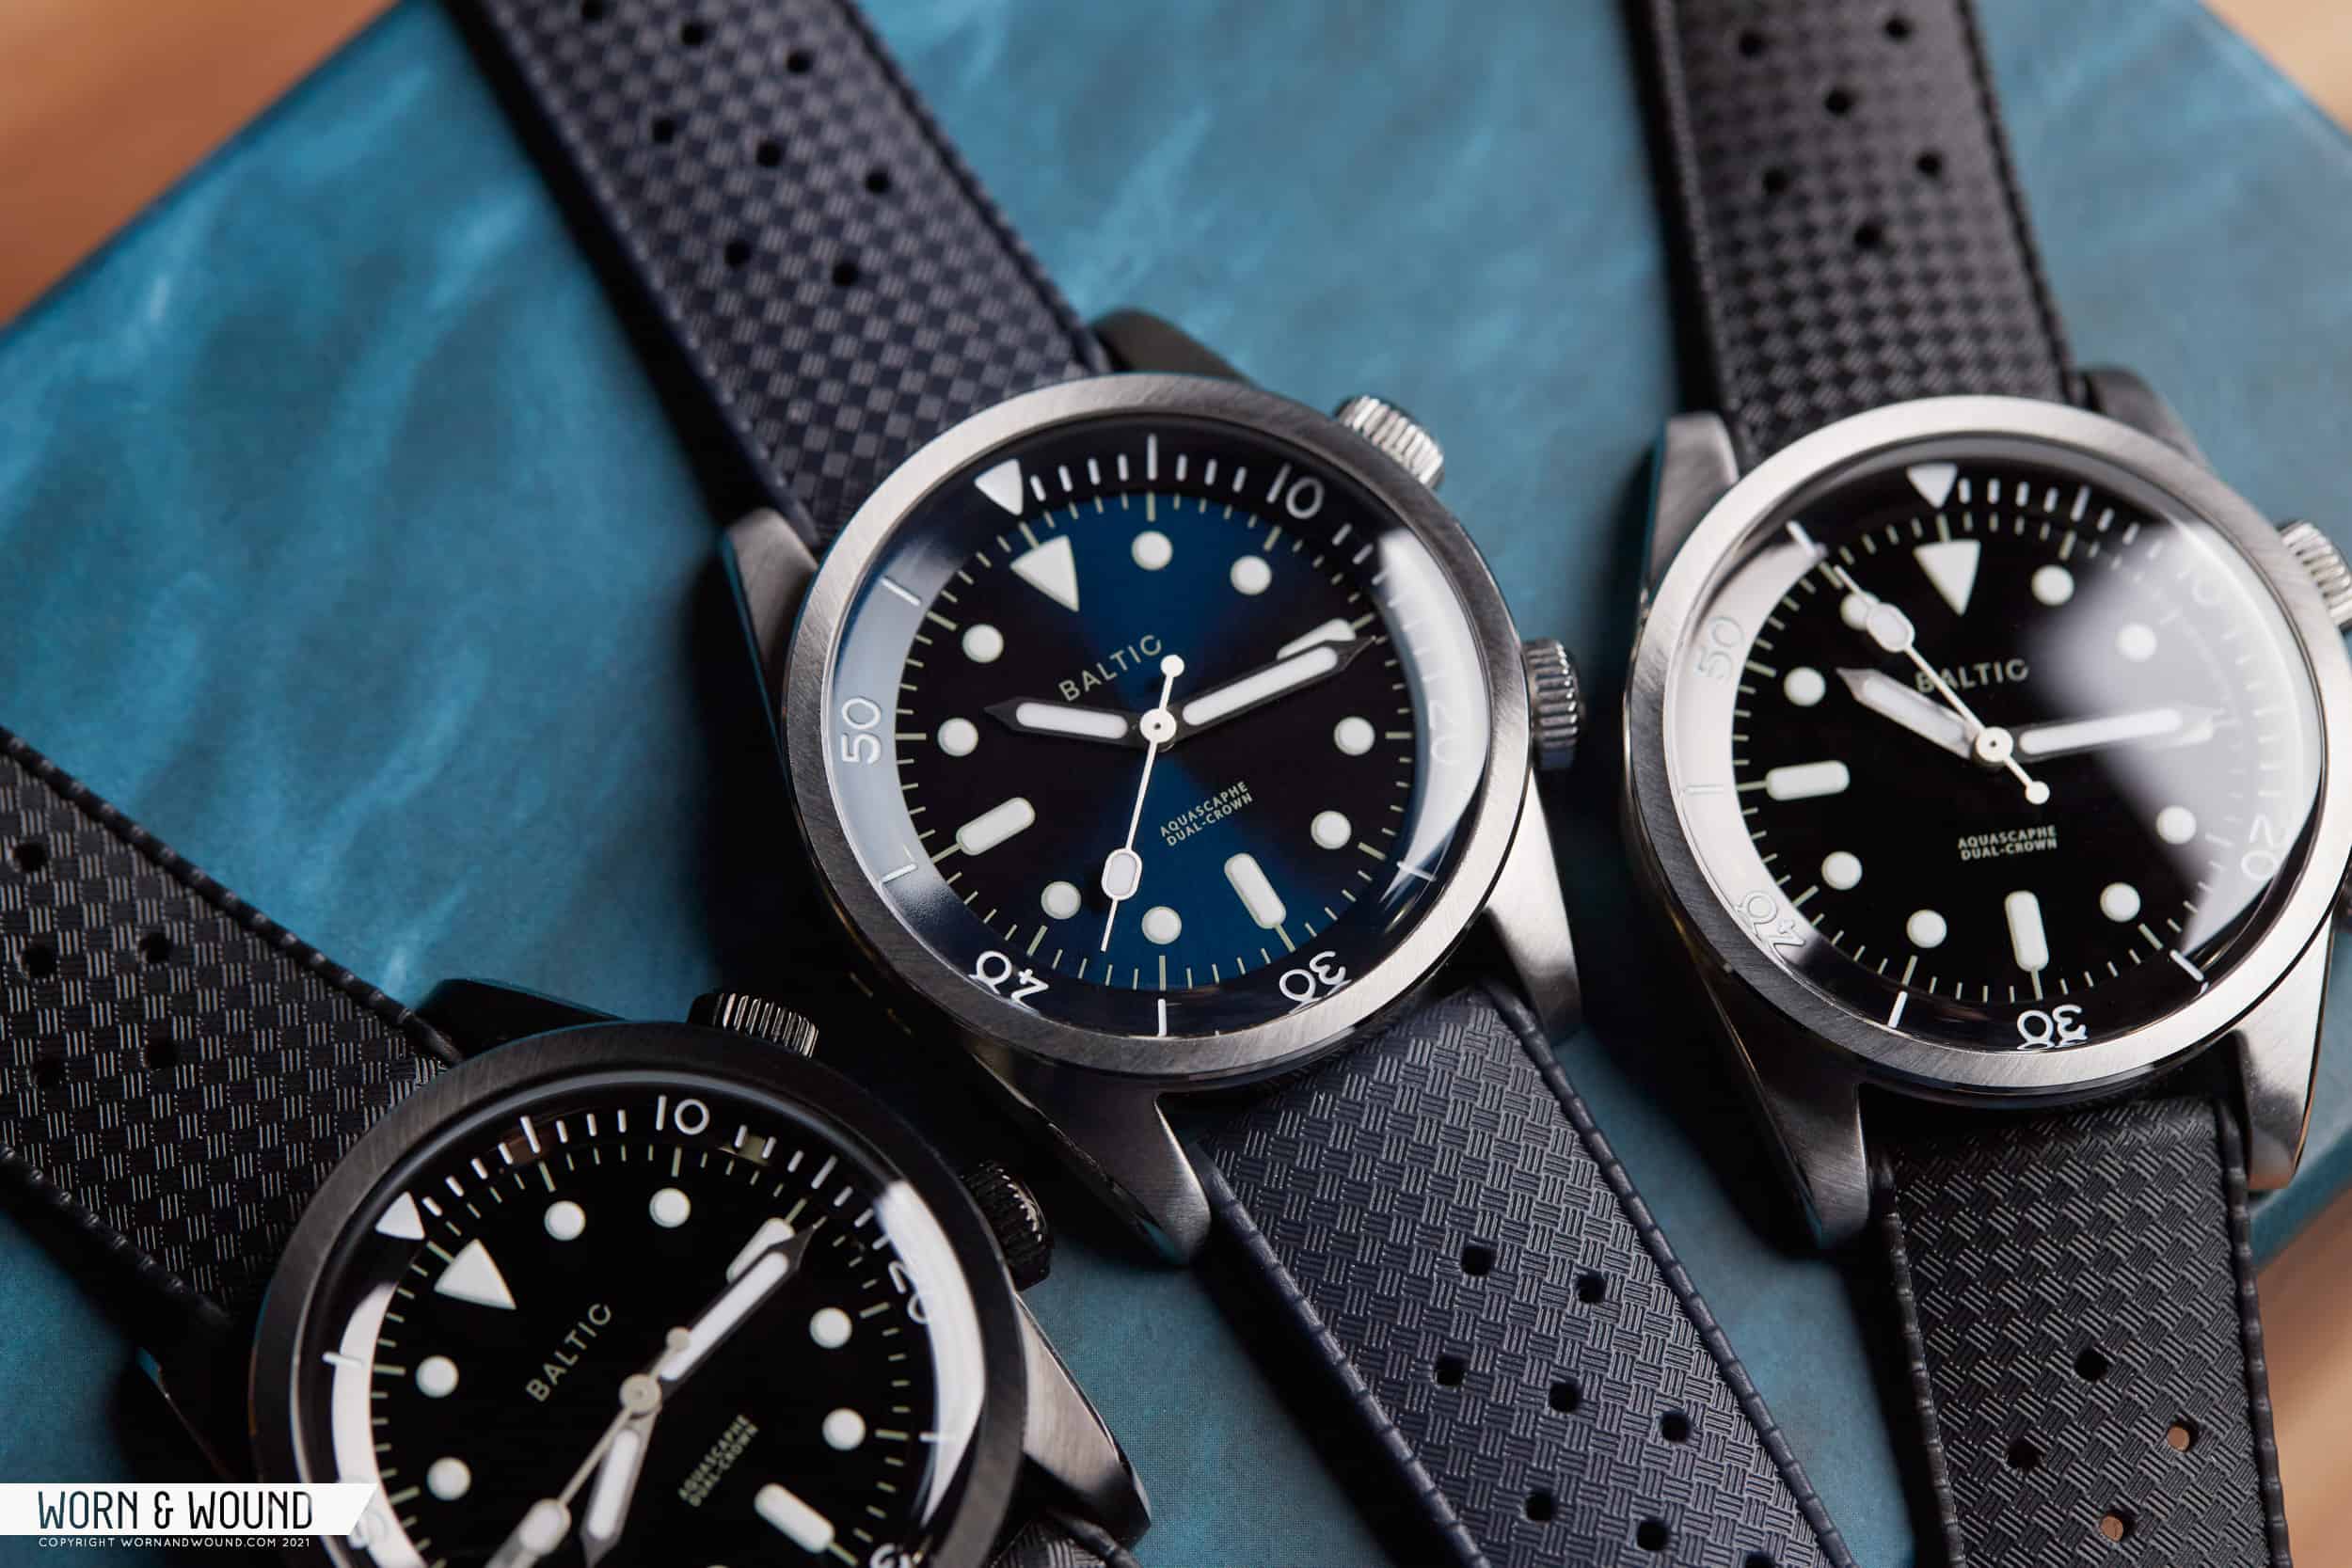 Introducing the Baltic Aquascaphe Dual-Crown Divers - Worn & Wound